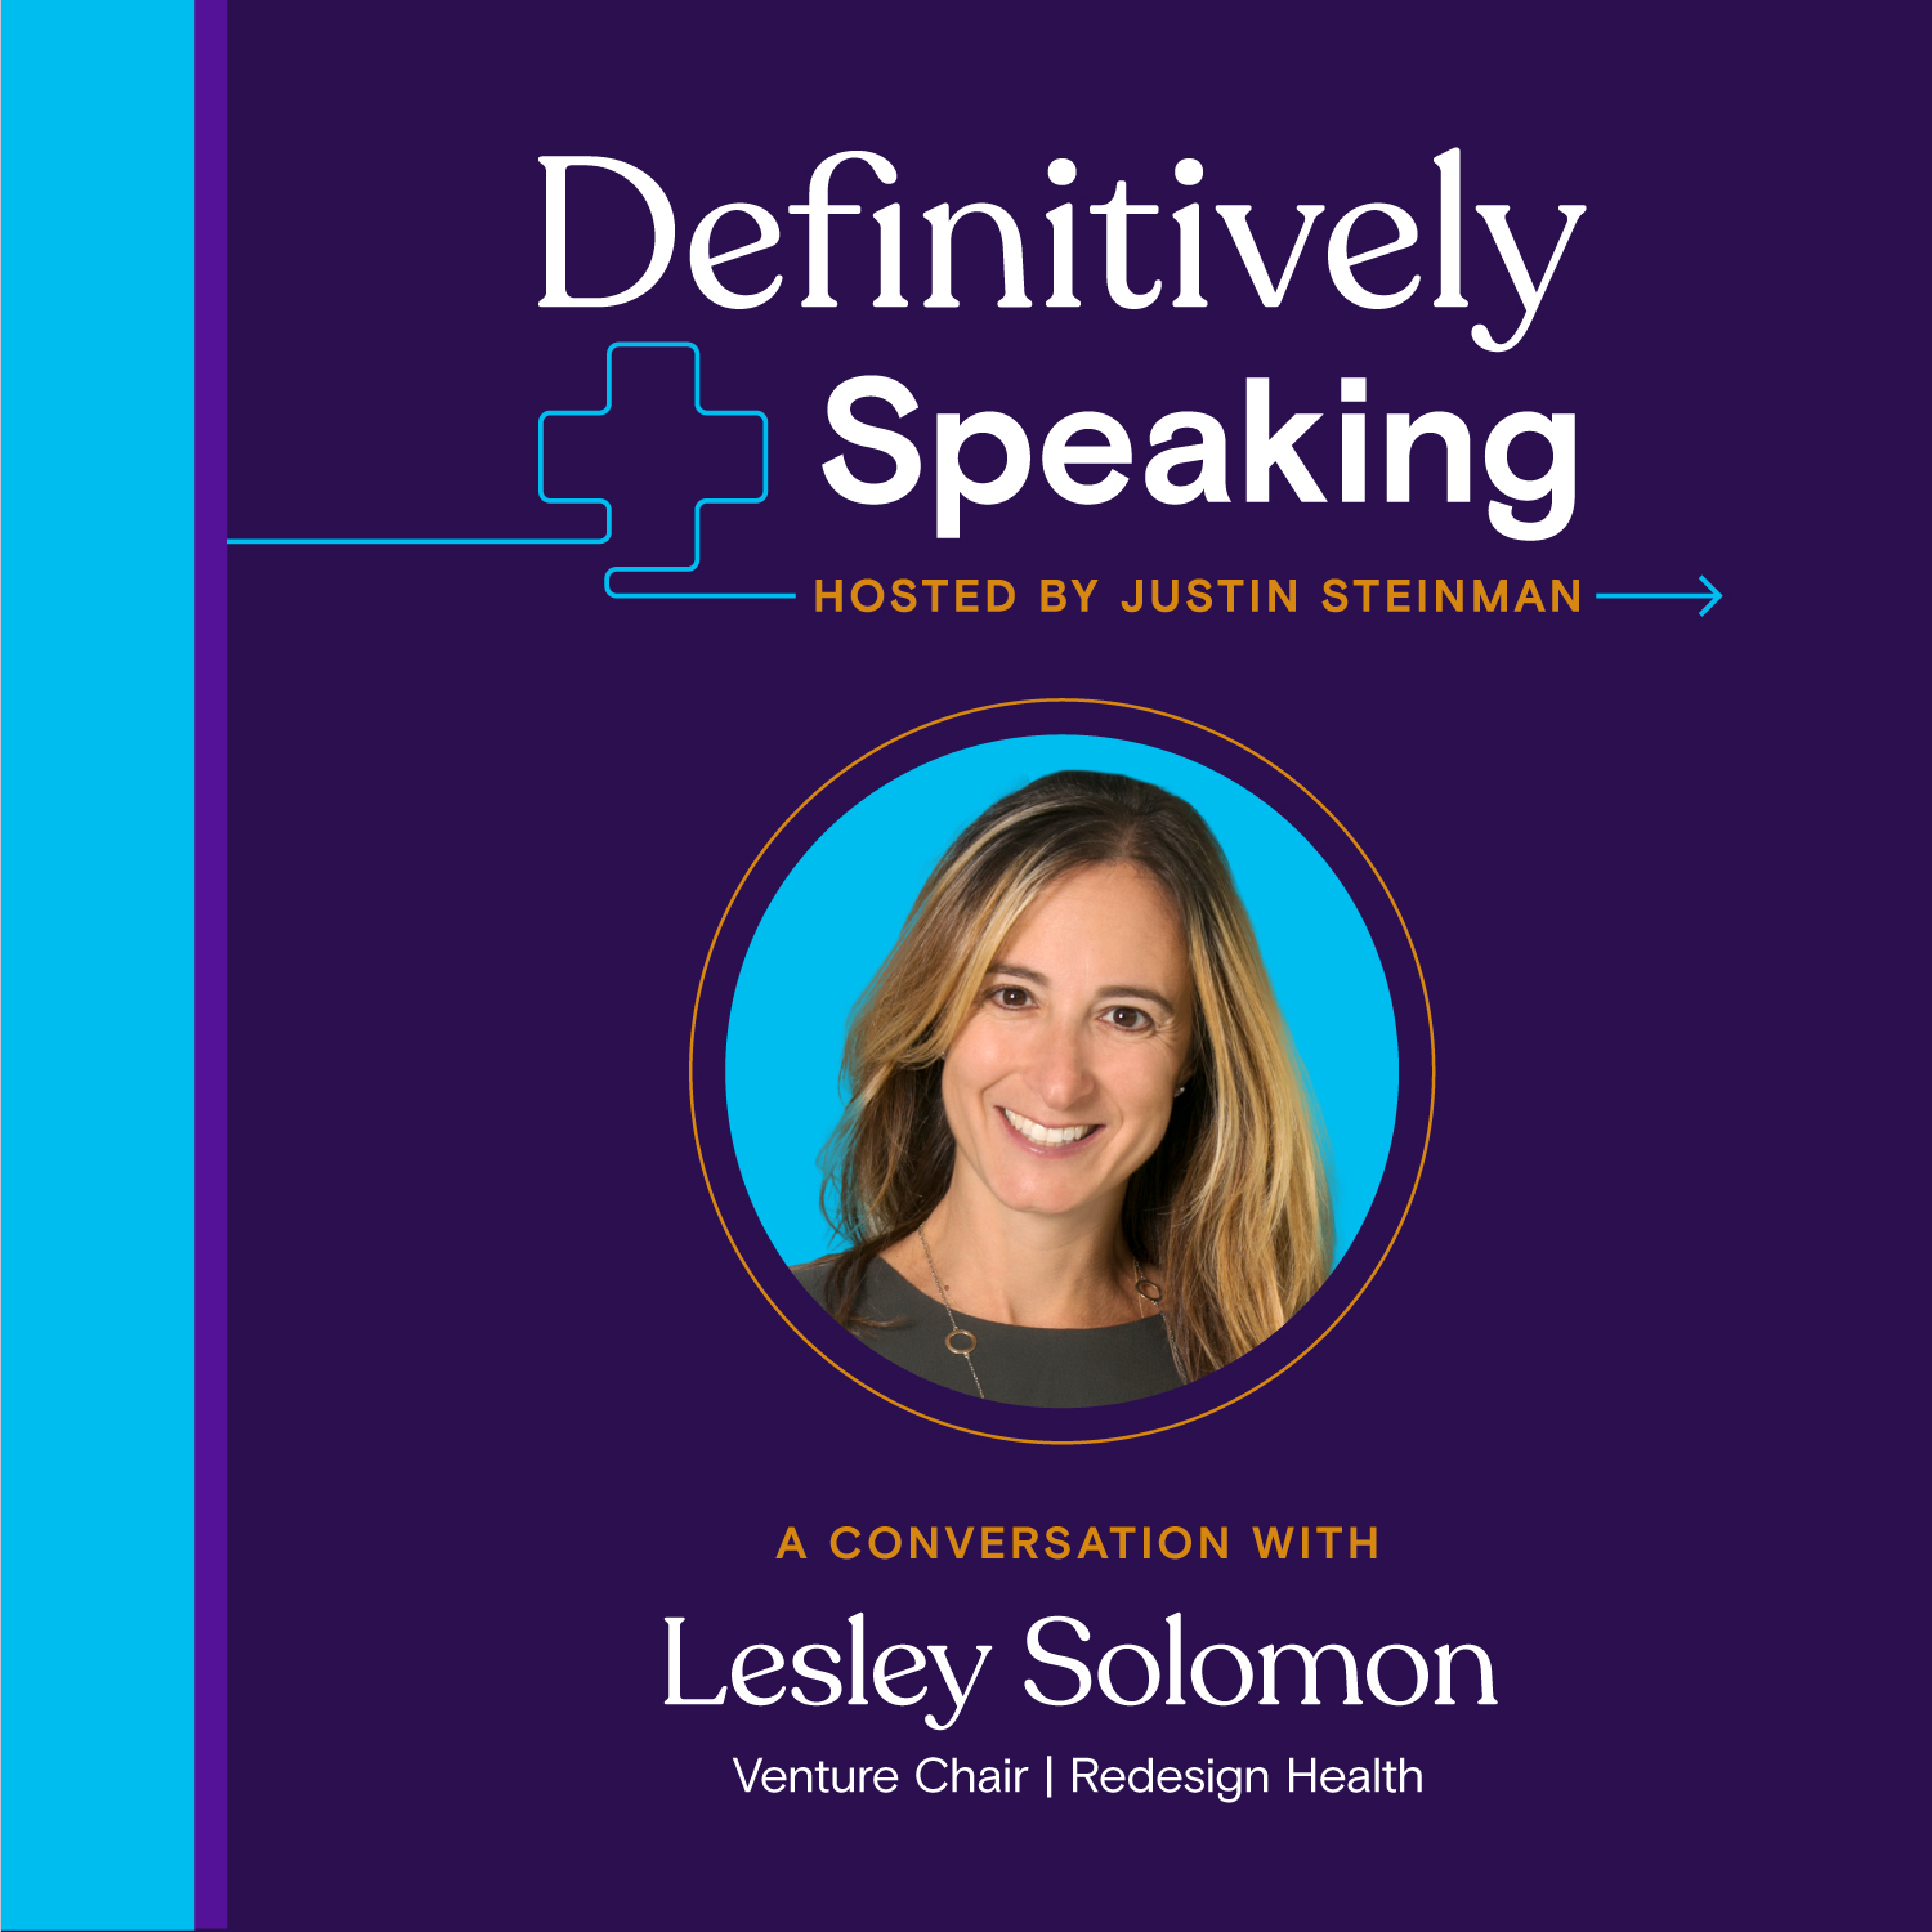 Episode 38: Is there a blueprint for innovation? Exploring startup success and failure with Lesley Solomon of Redesign Health